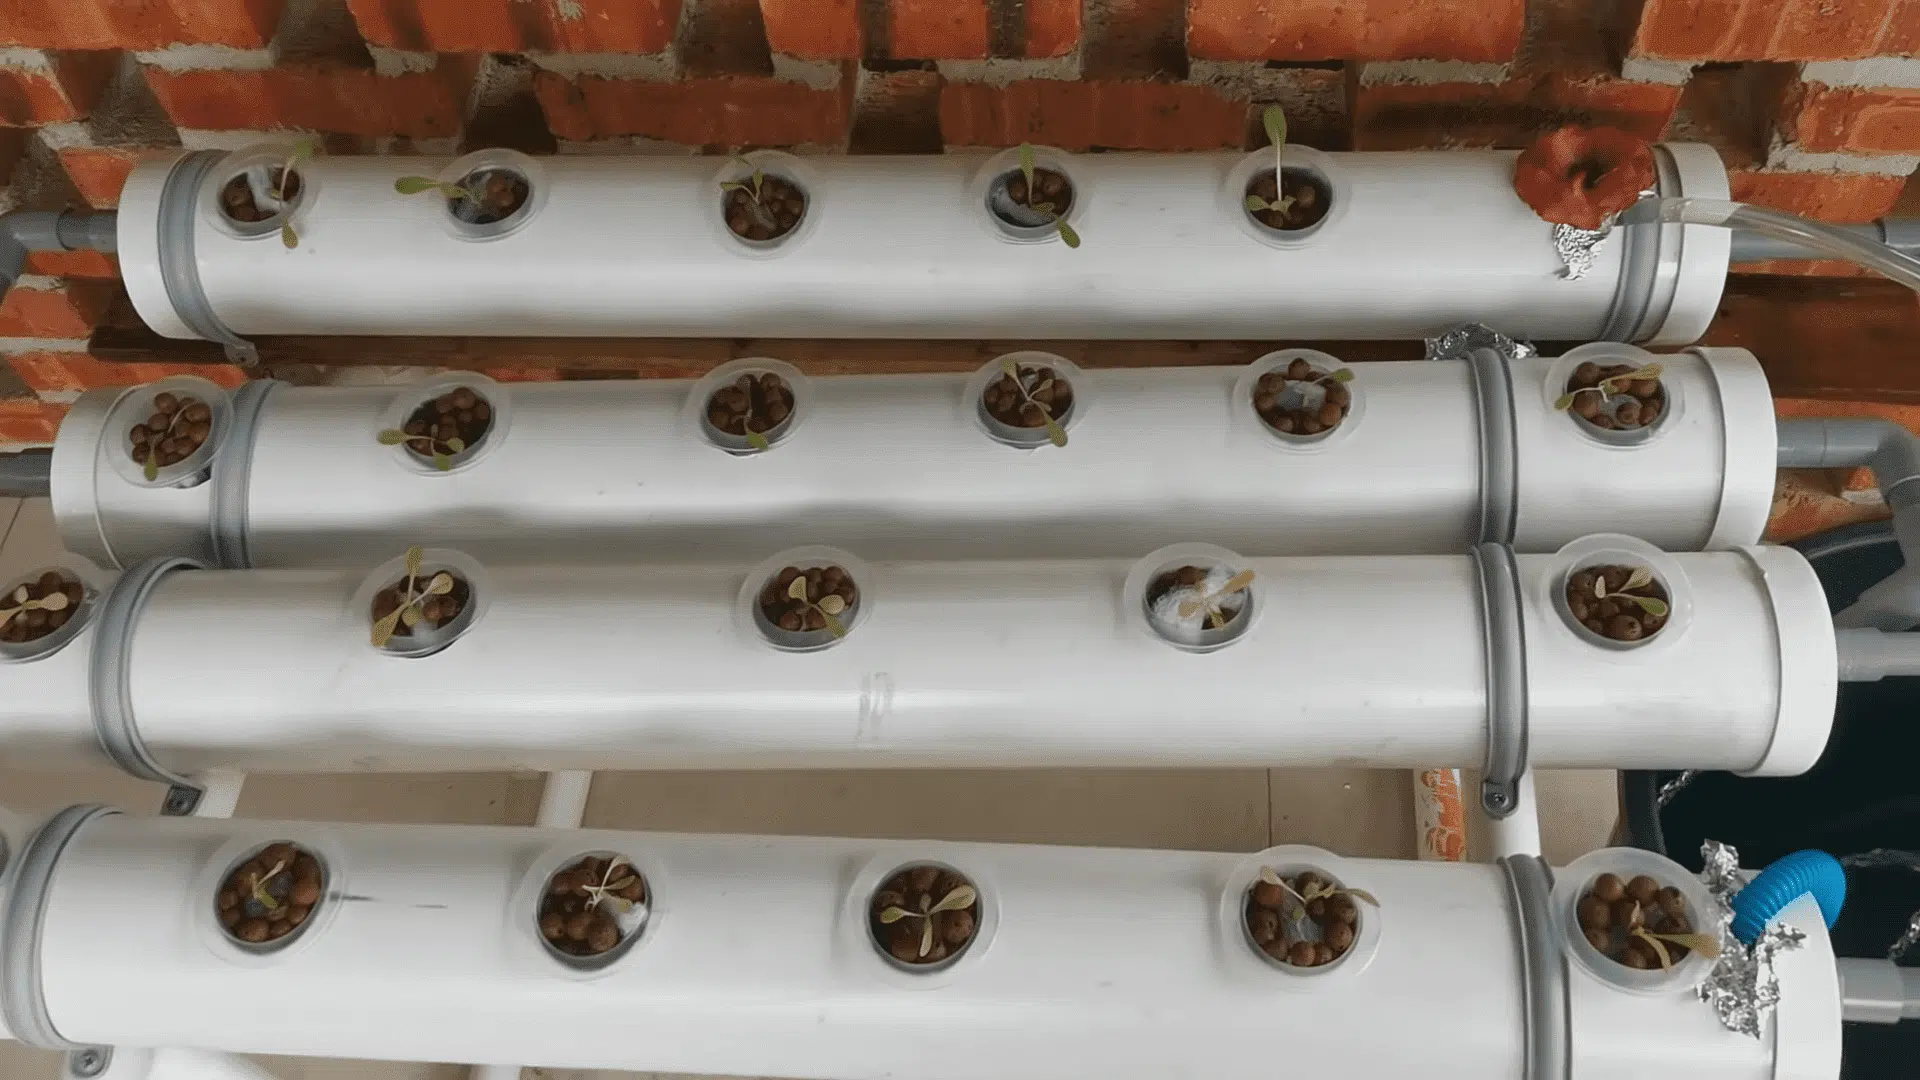 How To Make A DIY Hydroponics Growing System In 6 Easy Steps - 63